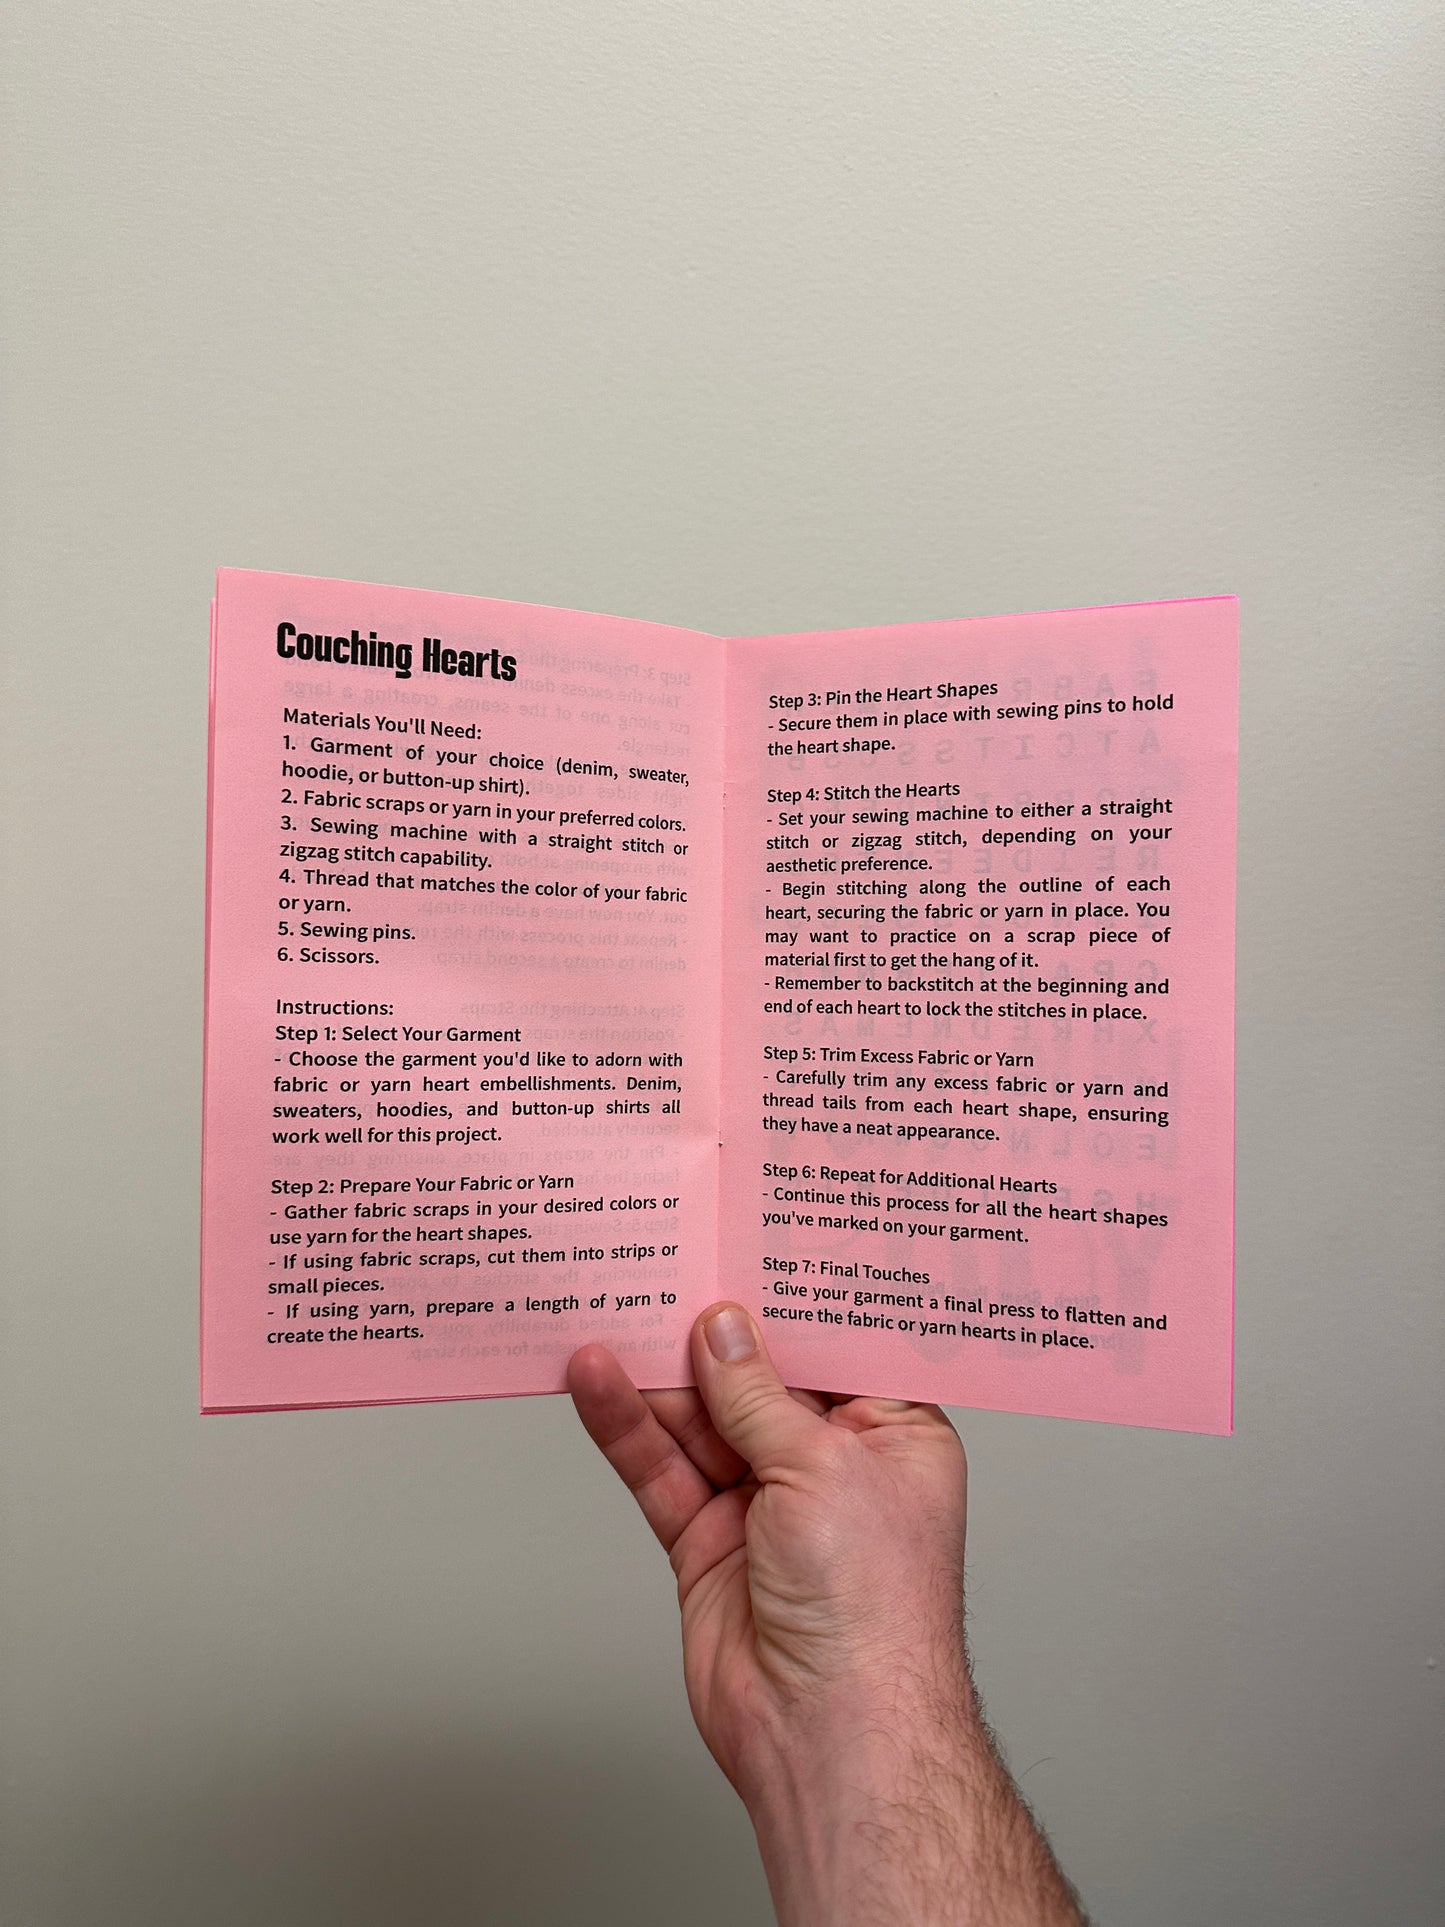 Blind Date with a Sewing Machine Zine